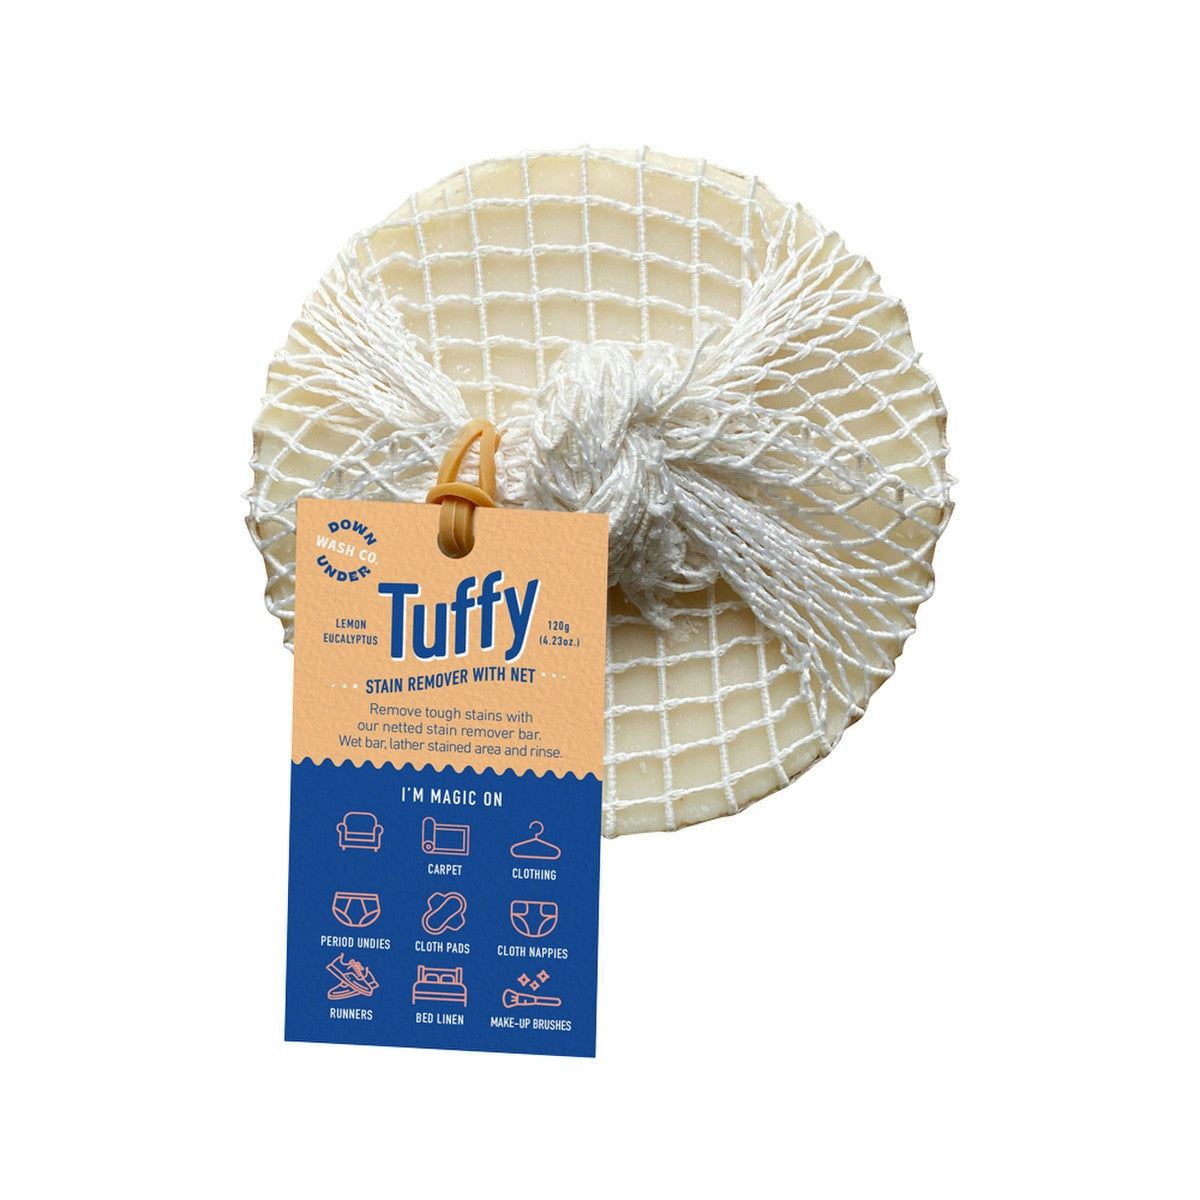 image of Downunder Wash Co. Tuffy Stain Remover with Net Lemon Eucalyptus 120g on white background